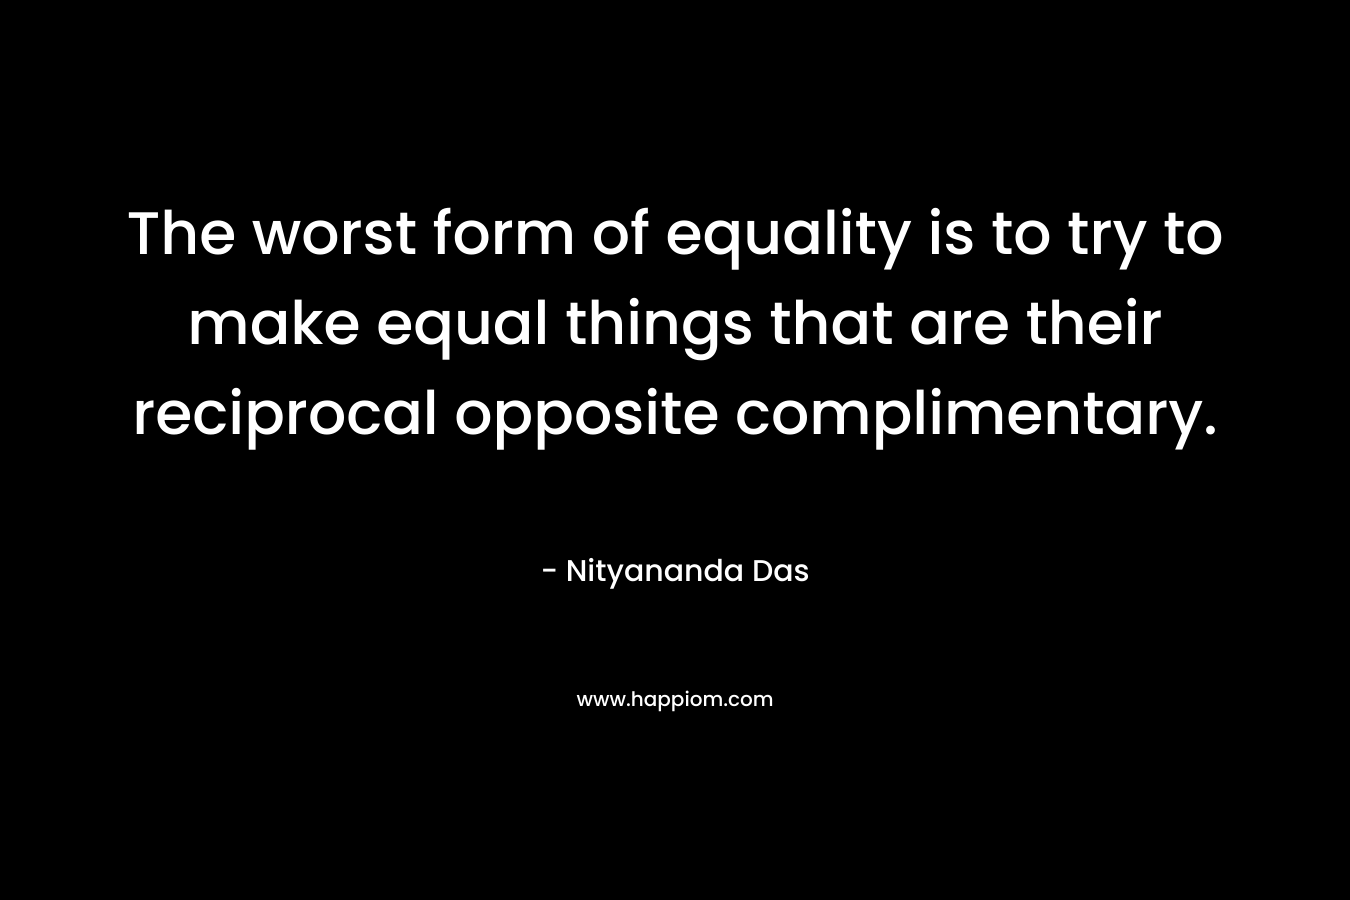 The worst form of equality is to try to make equal things that are their reciprocal opposite complimentary.